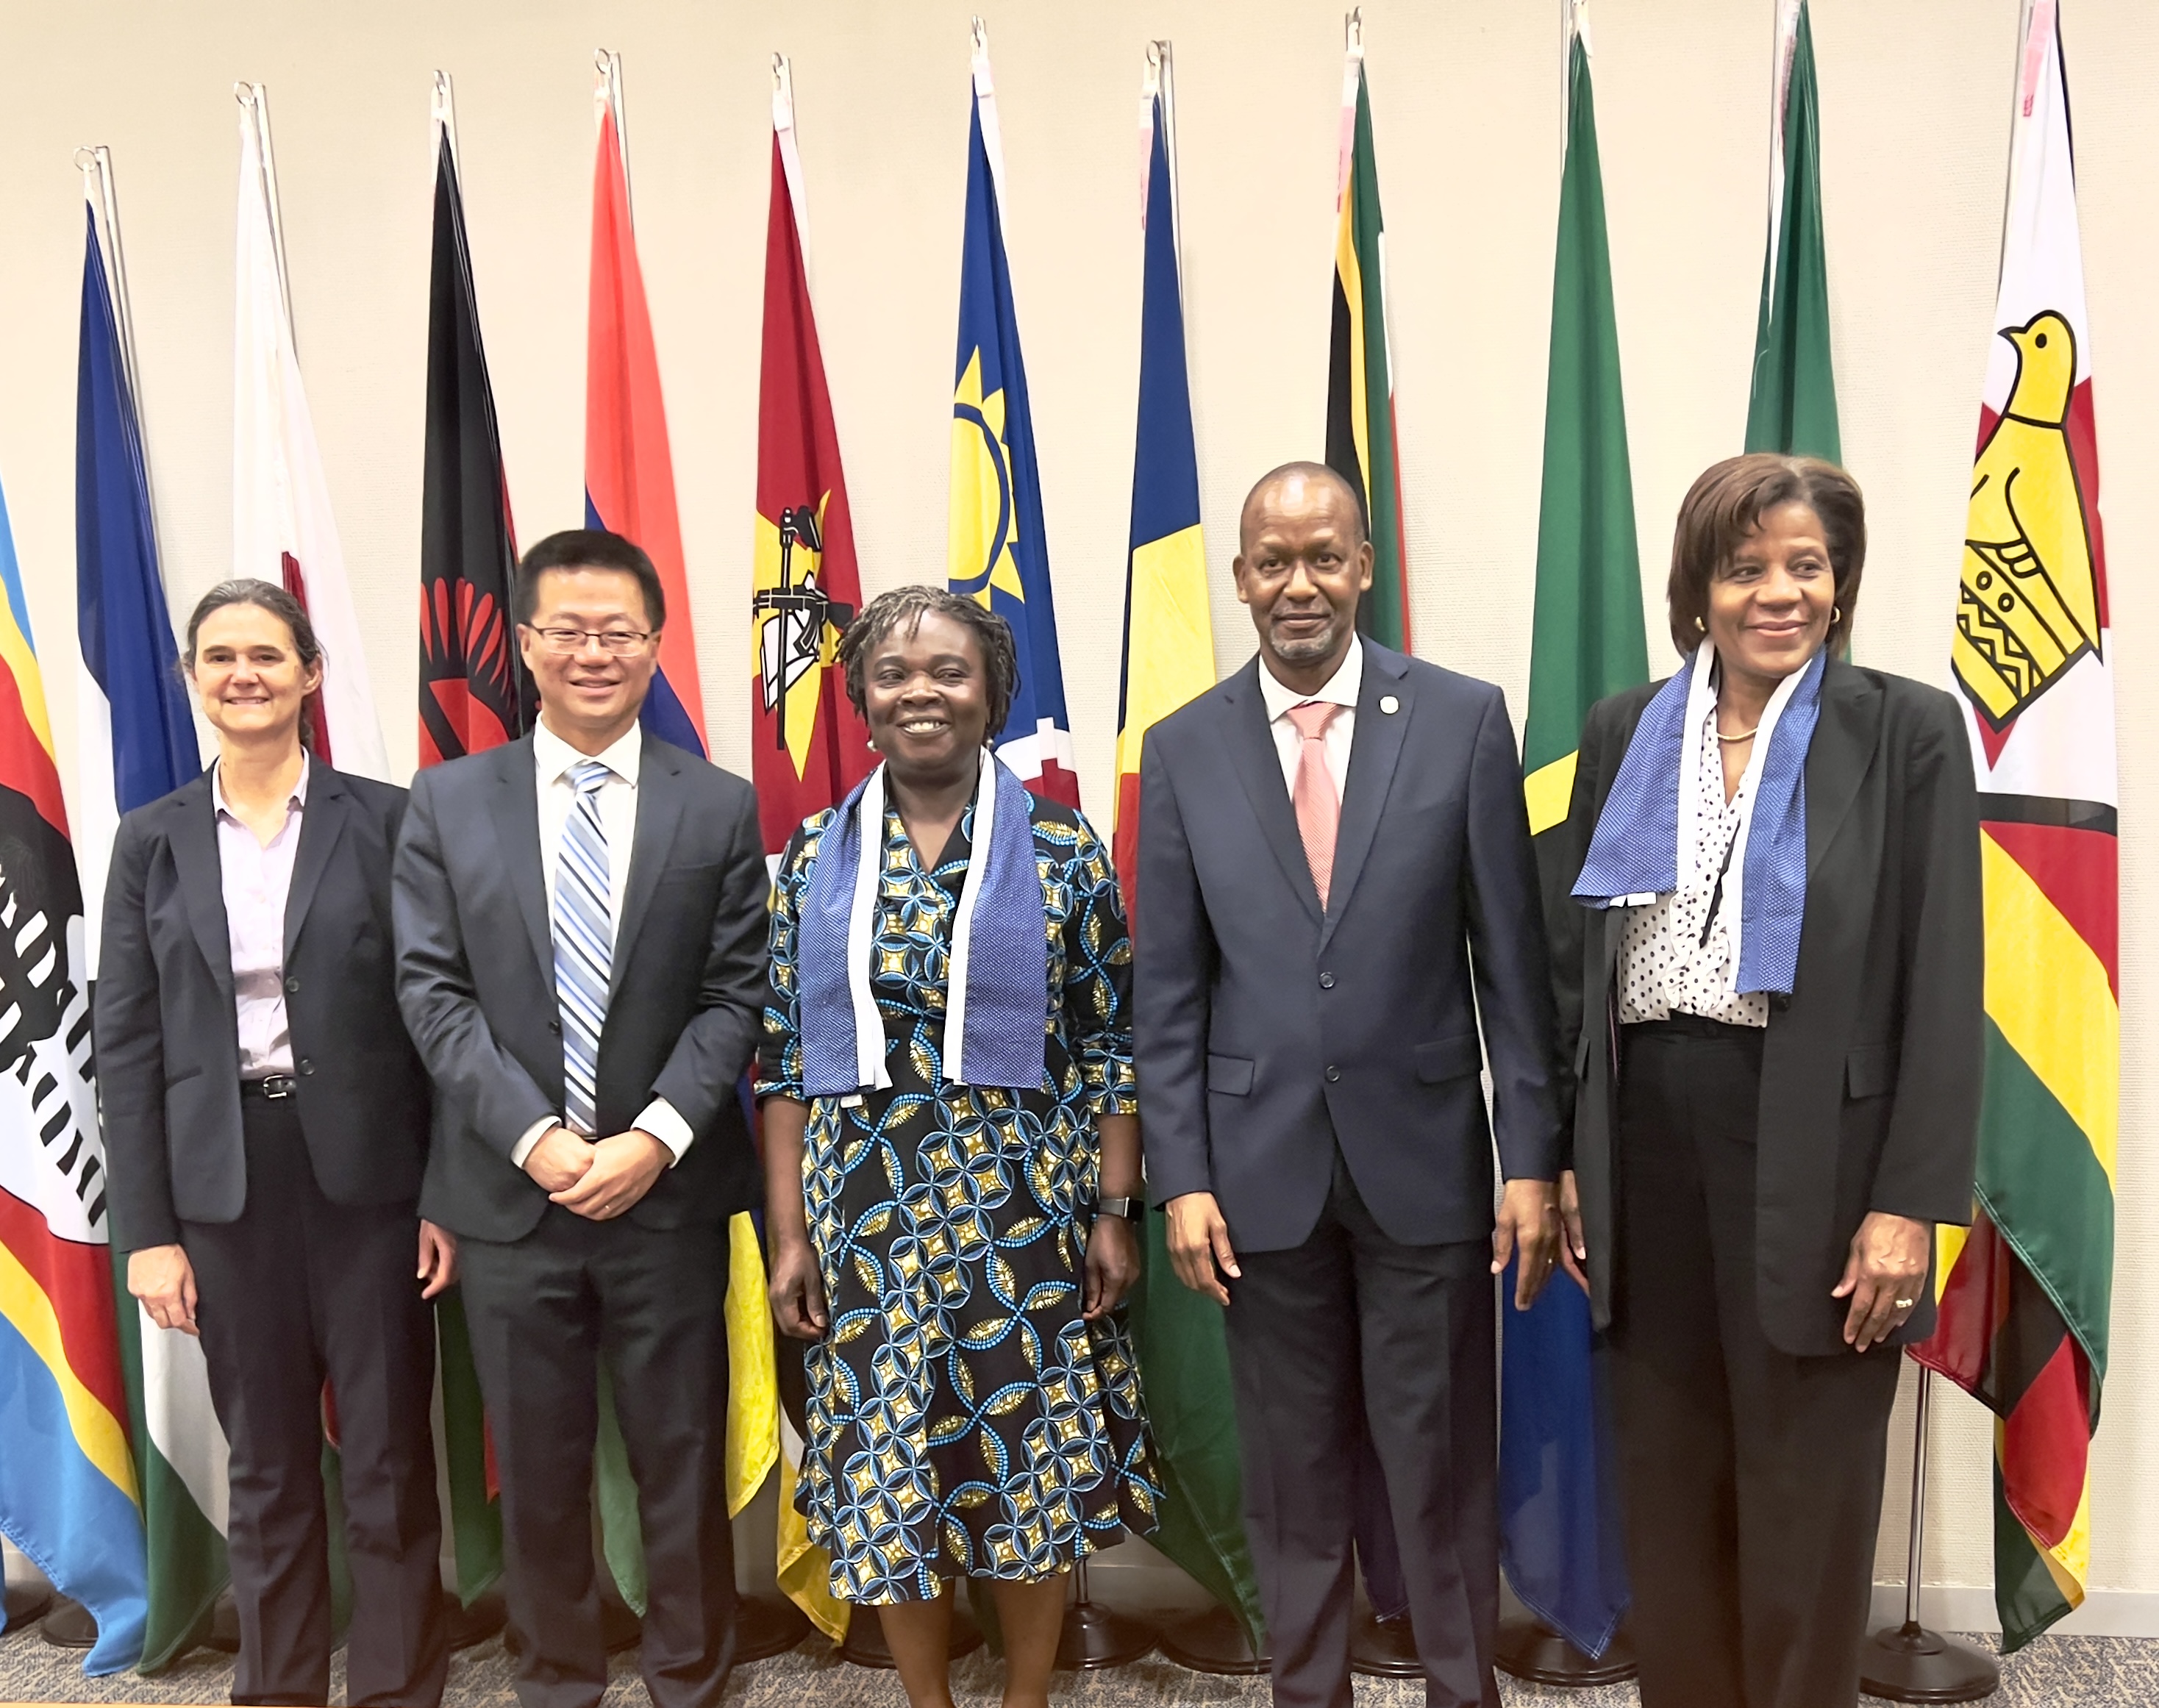 The Regional Vice President for Eastern and Southern Africa, of the World Bank Group, Her Excellency Dr. Victoria Kwakwa, paid a courtesy call on the Executive Secretary of SADC, His Excellency Mr. Elias Magosi, at the SADC Headquarters, in Gaborone, Botswana, on 9 November 2023.